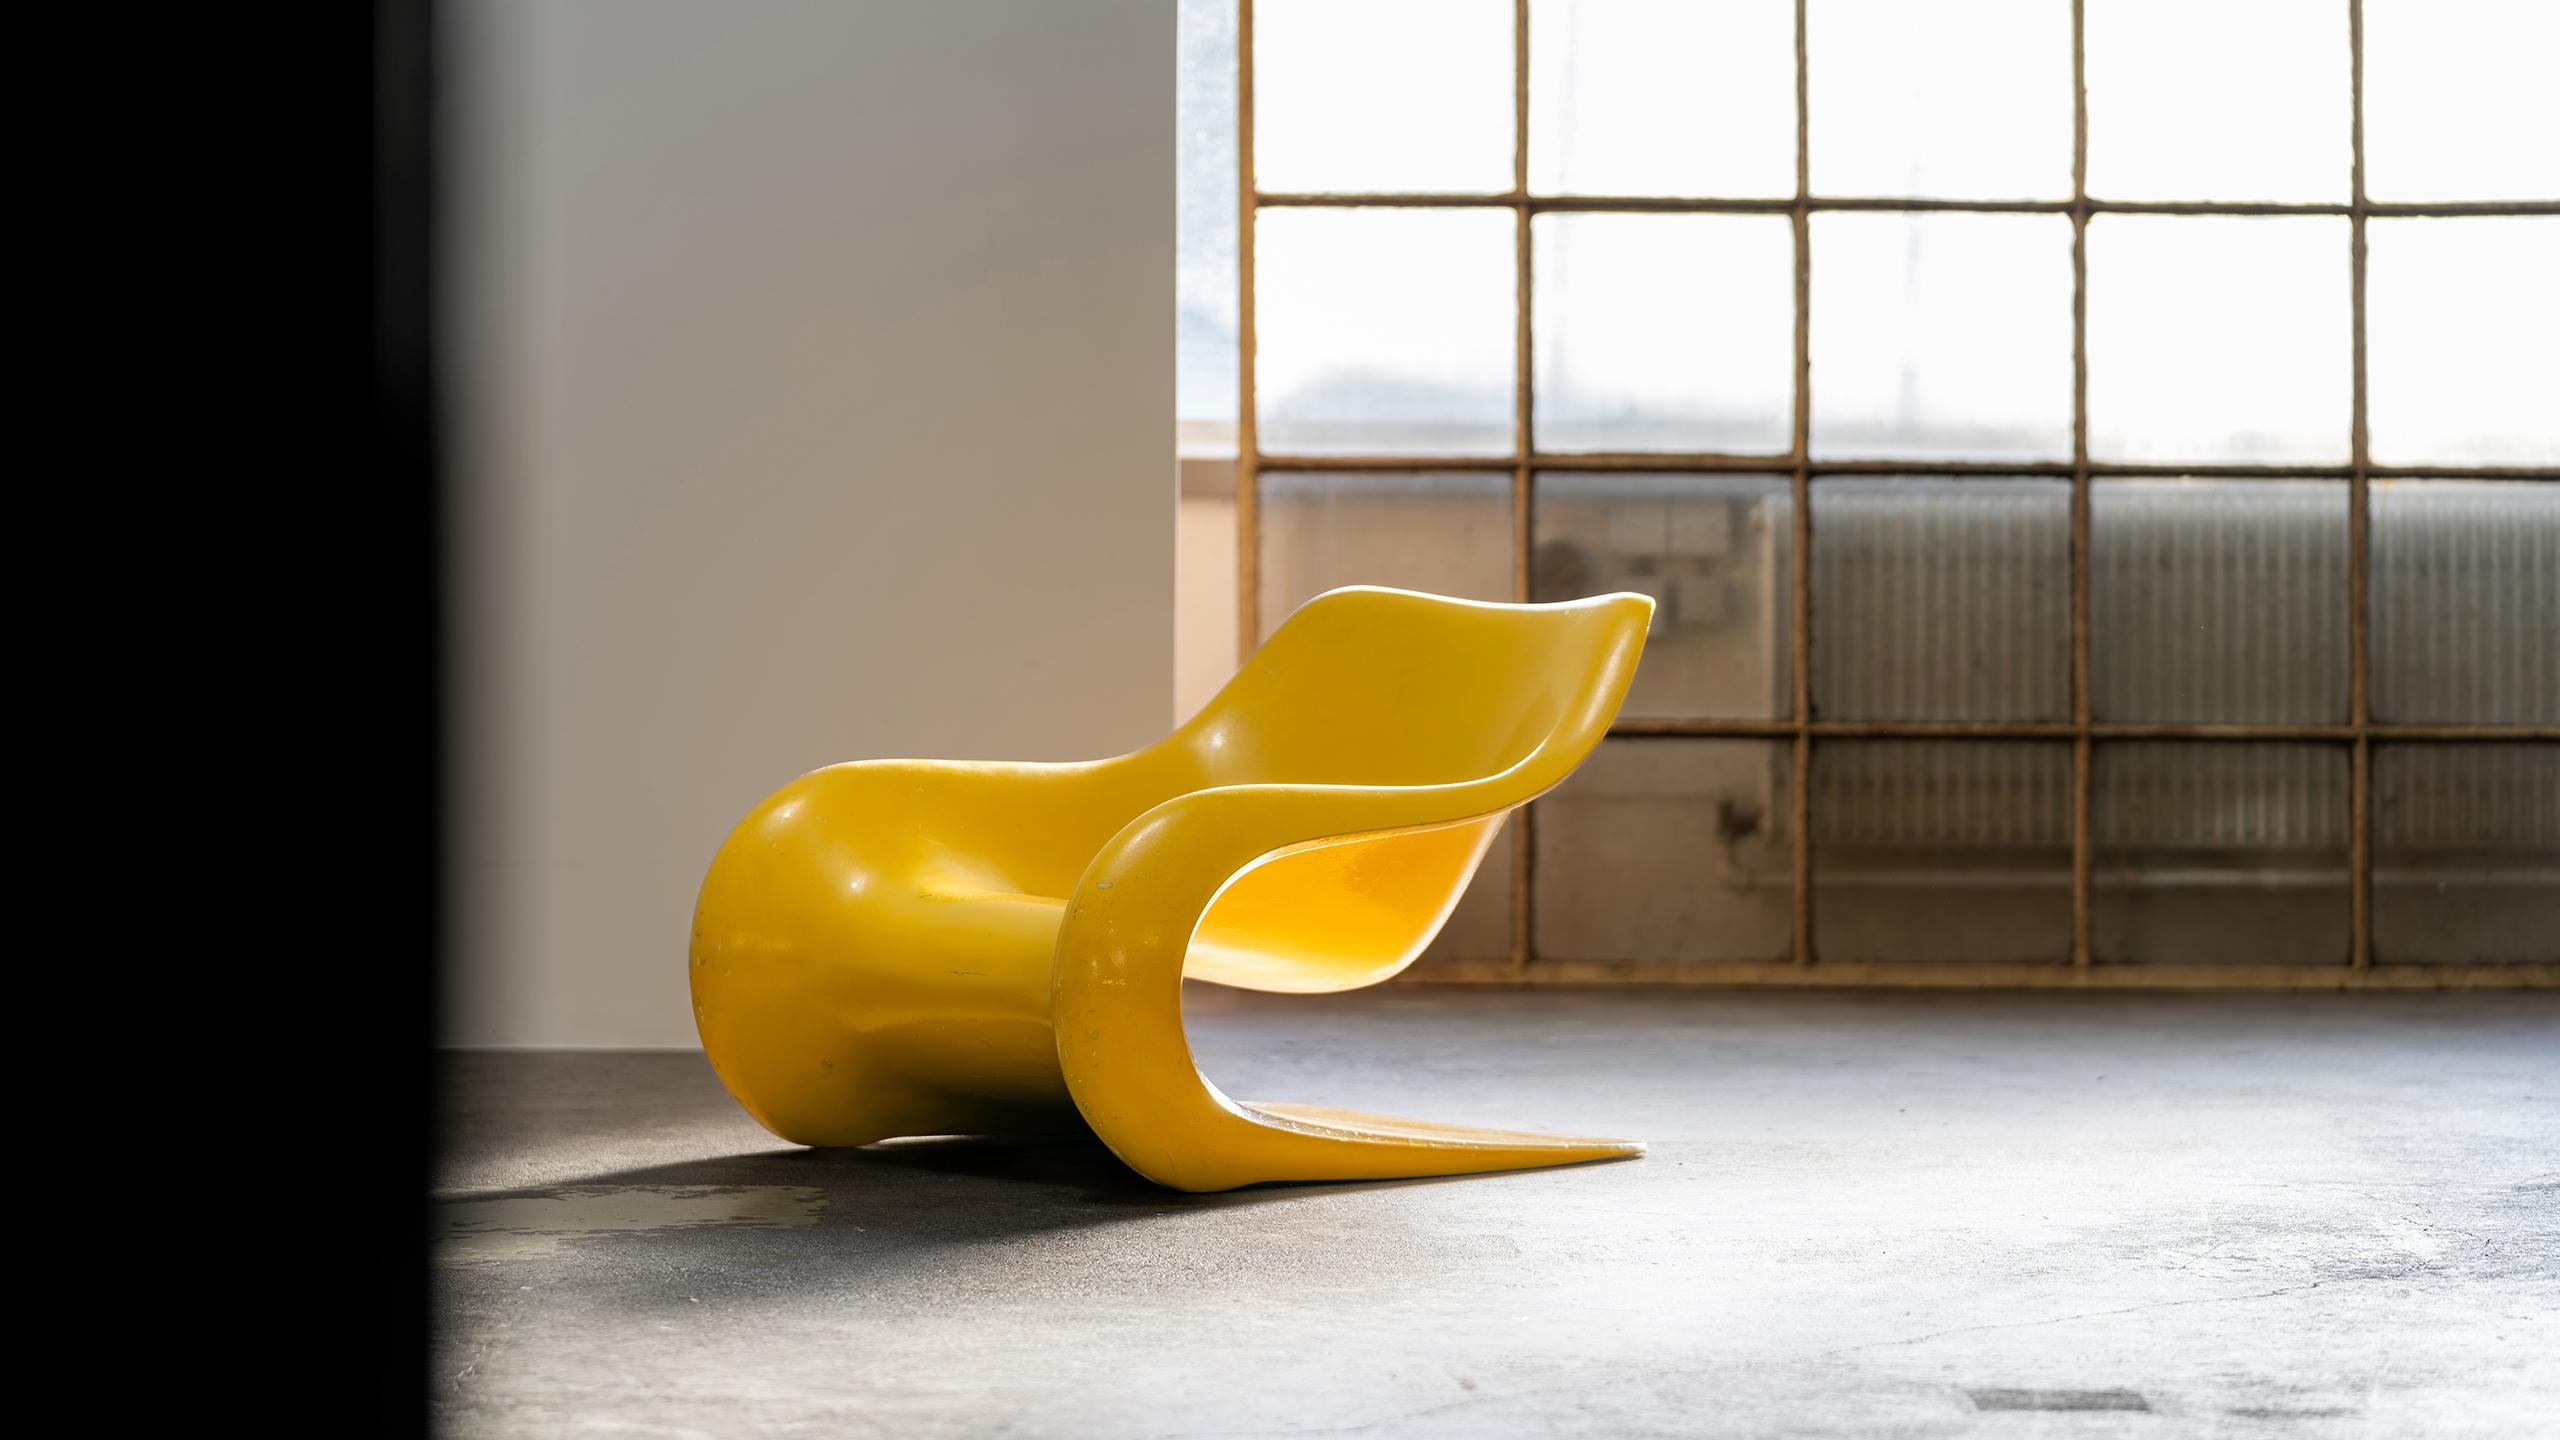 Rare Targa chair designed by Klaus Uredat for Horn Collection, Germany in the early 1970s. 

Composite fiberglass, very sturdy construction, stunning organic design.
Comes from a hotel pool area, there was a patch with a seat number on the top of